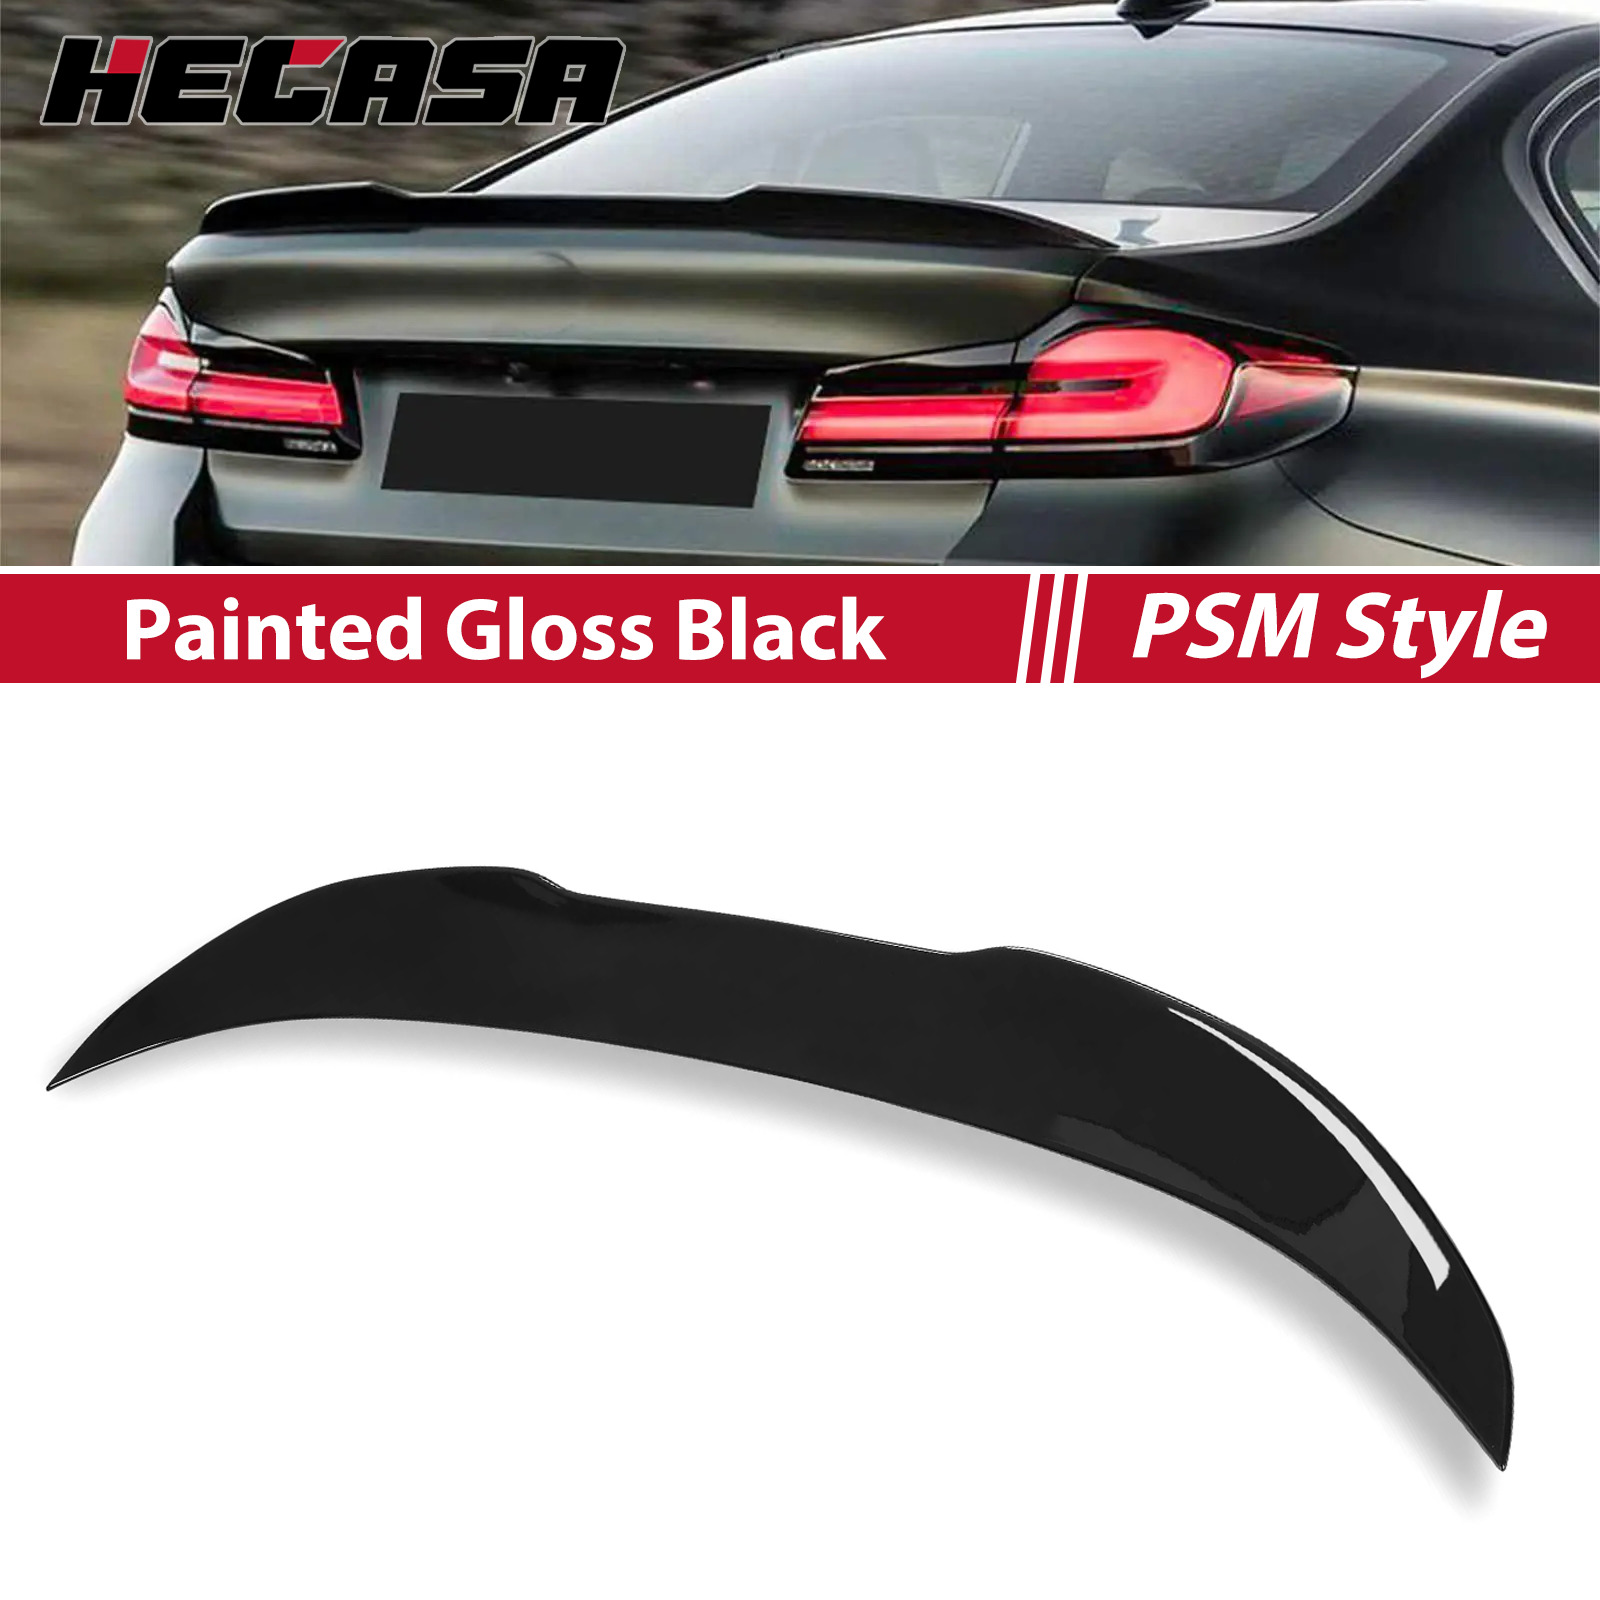 FOR 11-17 BMW F10 535i 535d 550i M5 Gloss Black PSM Style Rear Spoiler Lip Wing